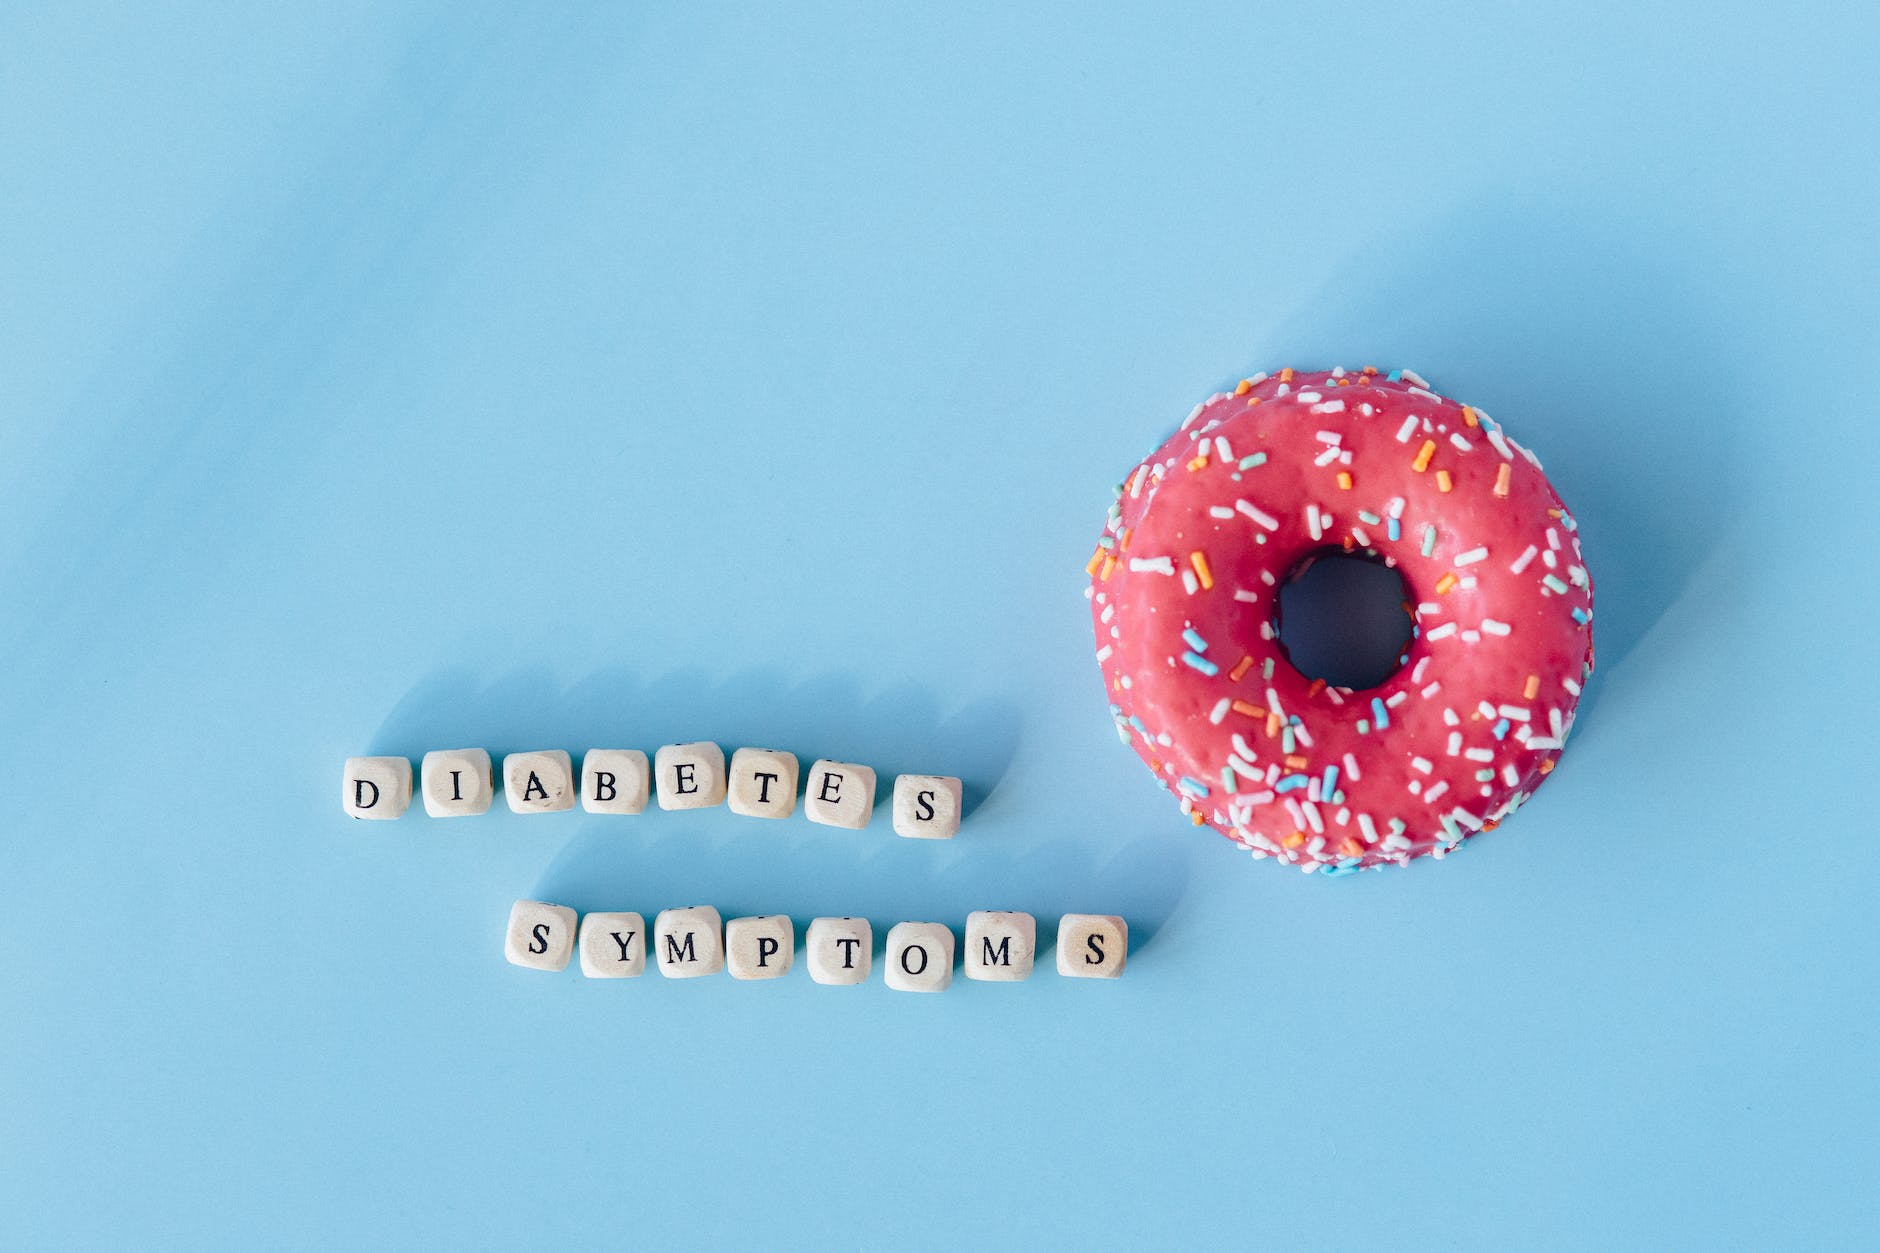 a doughnut and a message over blue surface